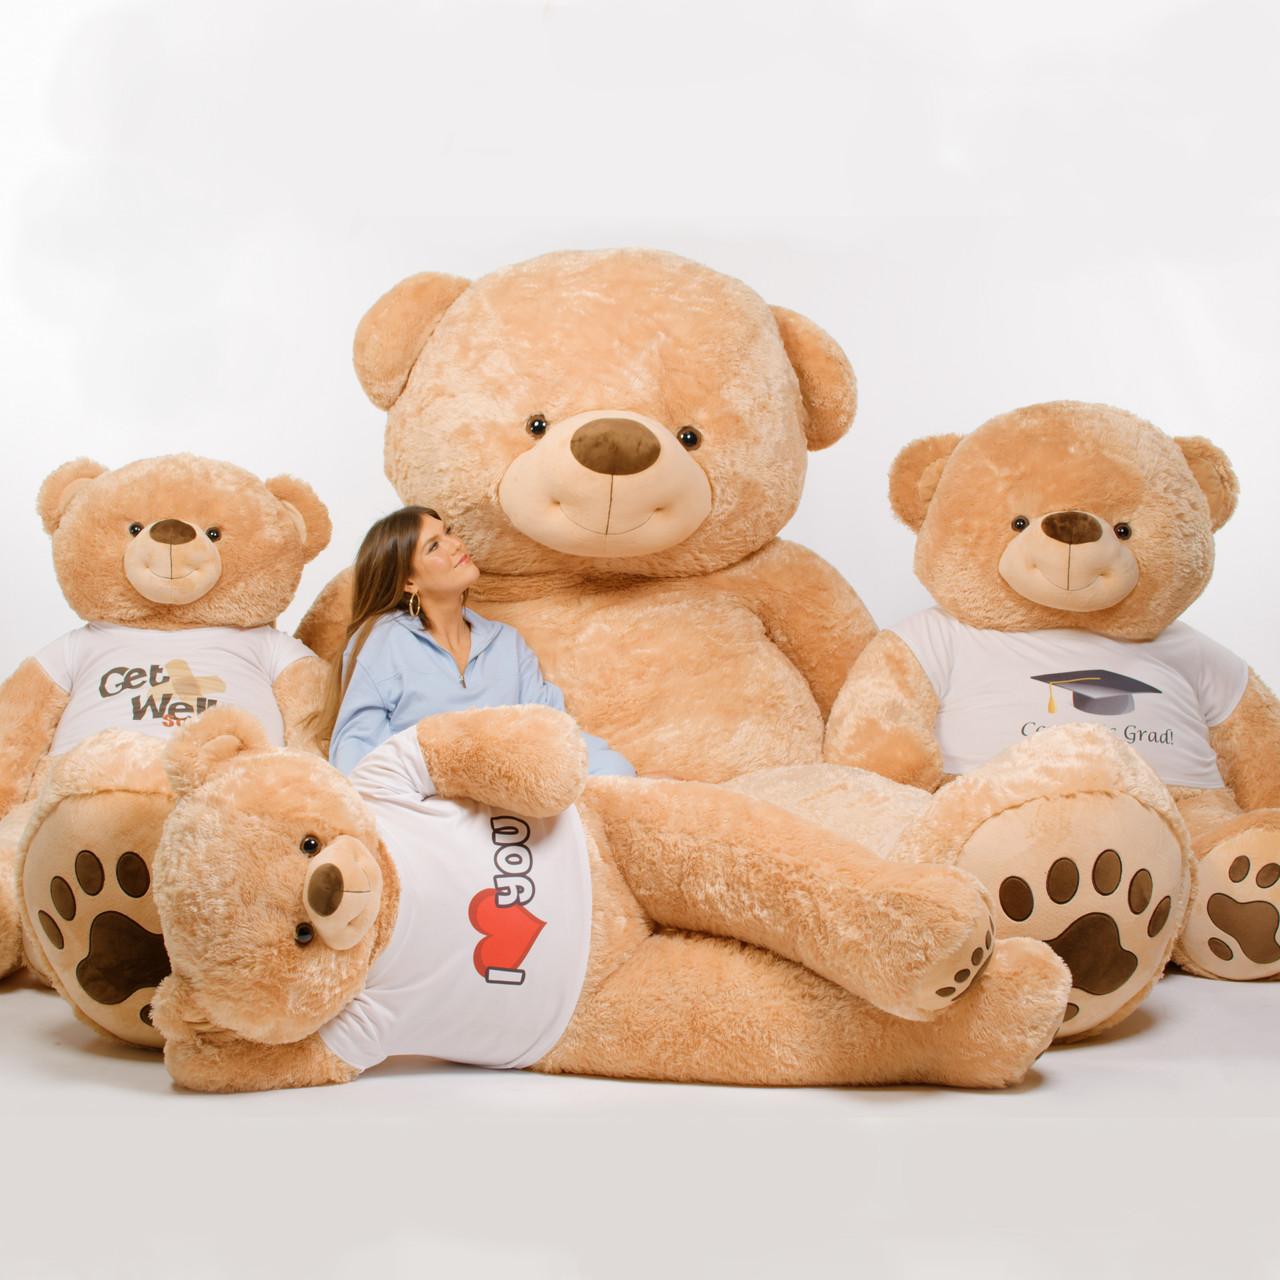 5ft to 10ft Life Size Teddy Bear - Giant Teddy Brand - Choose your Size &  Custom T-shirt with Optional Premium Preserved Roses!